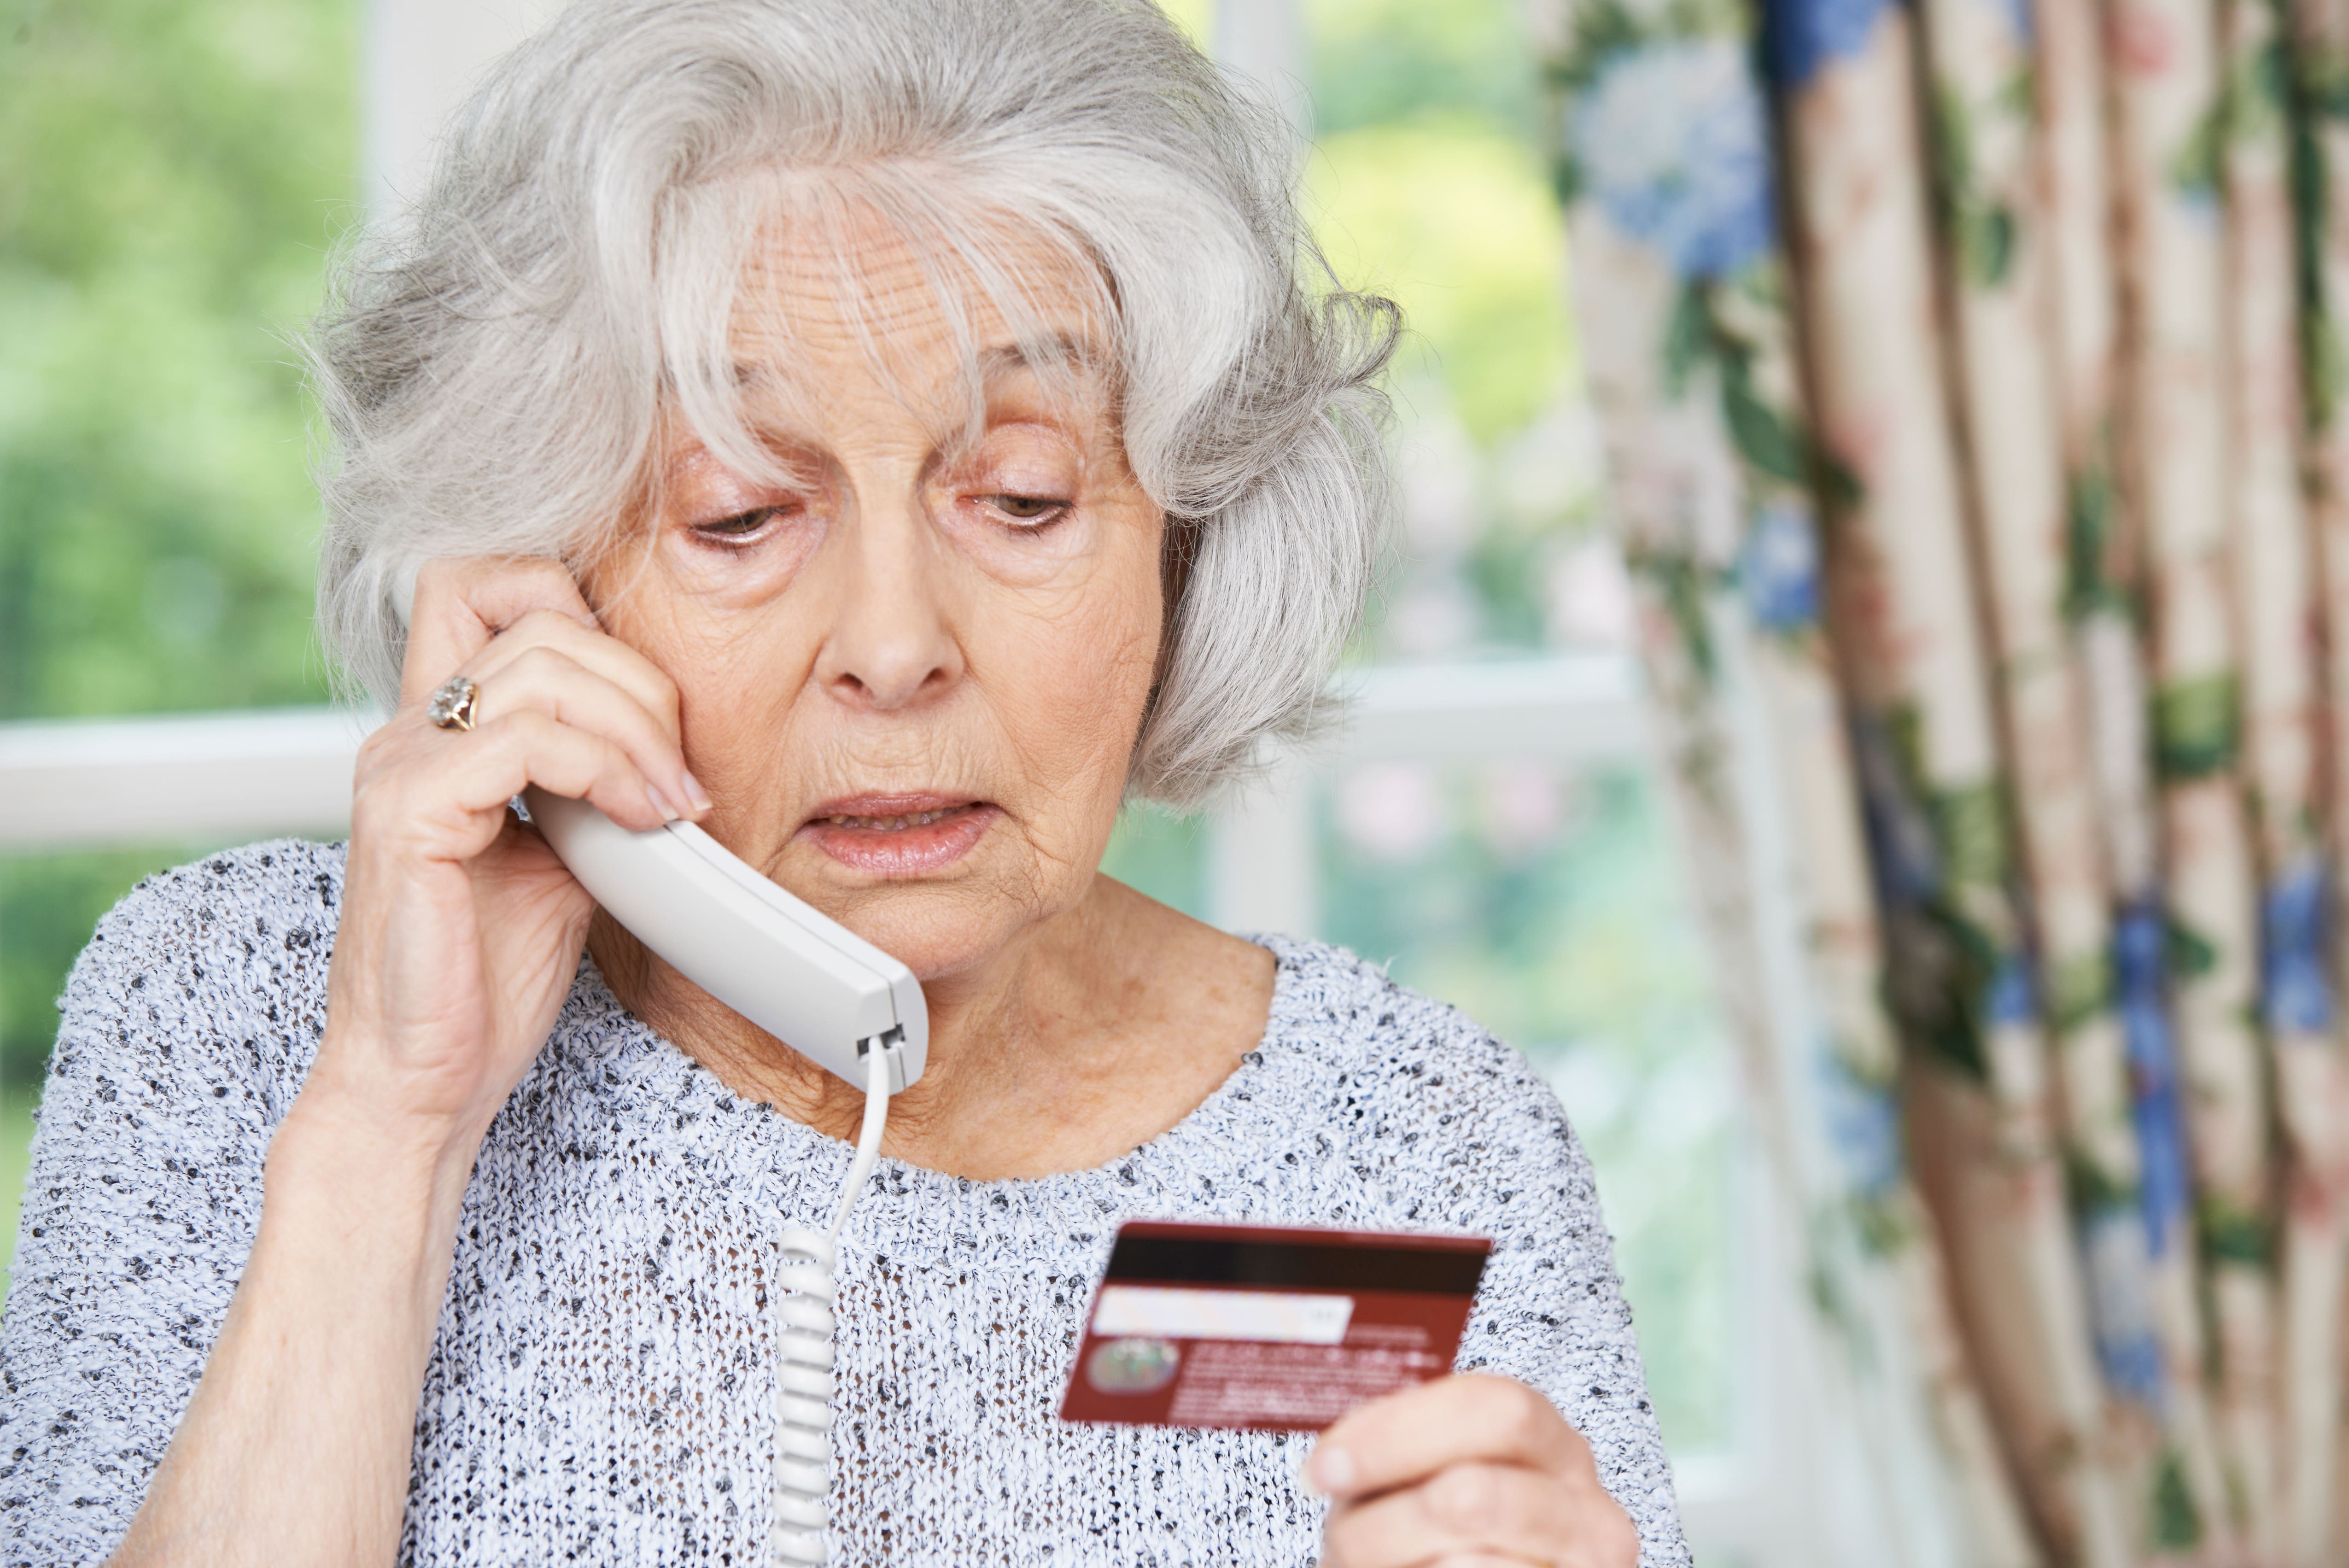 Any older adult can fall victim to this scam, including your loved one, and it happens more often than you might think.